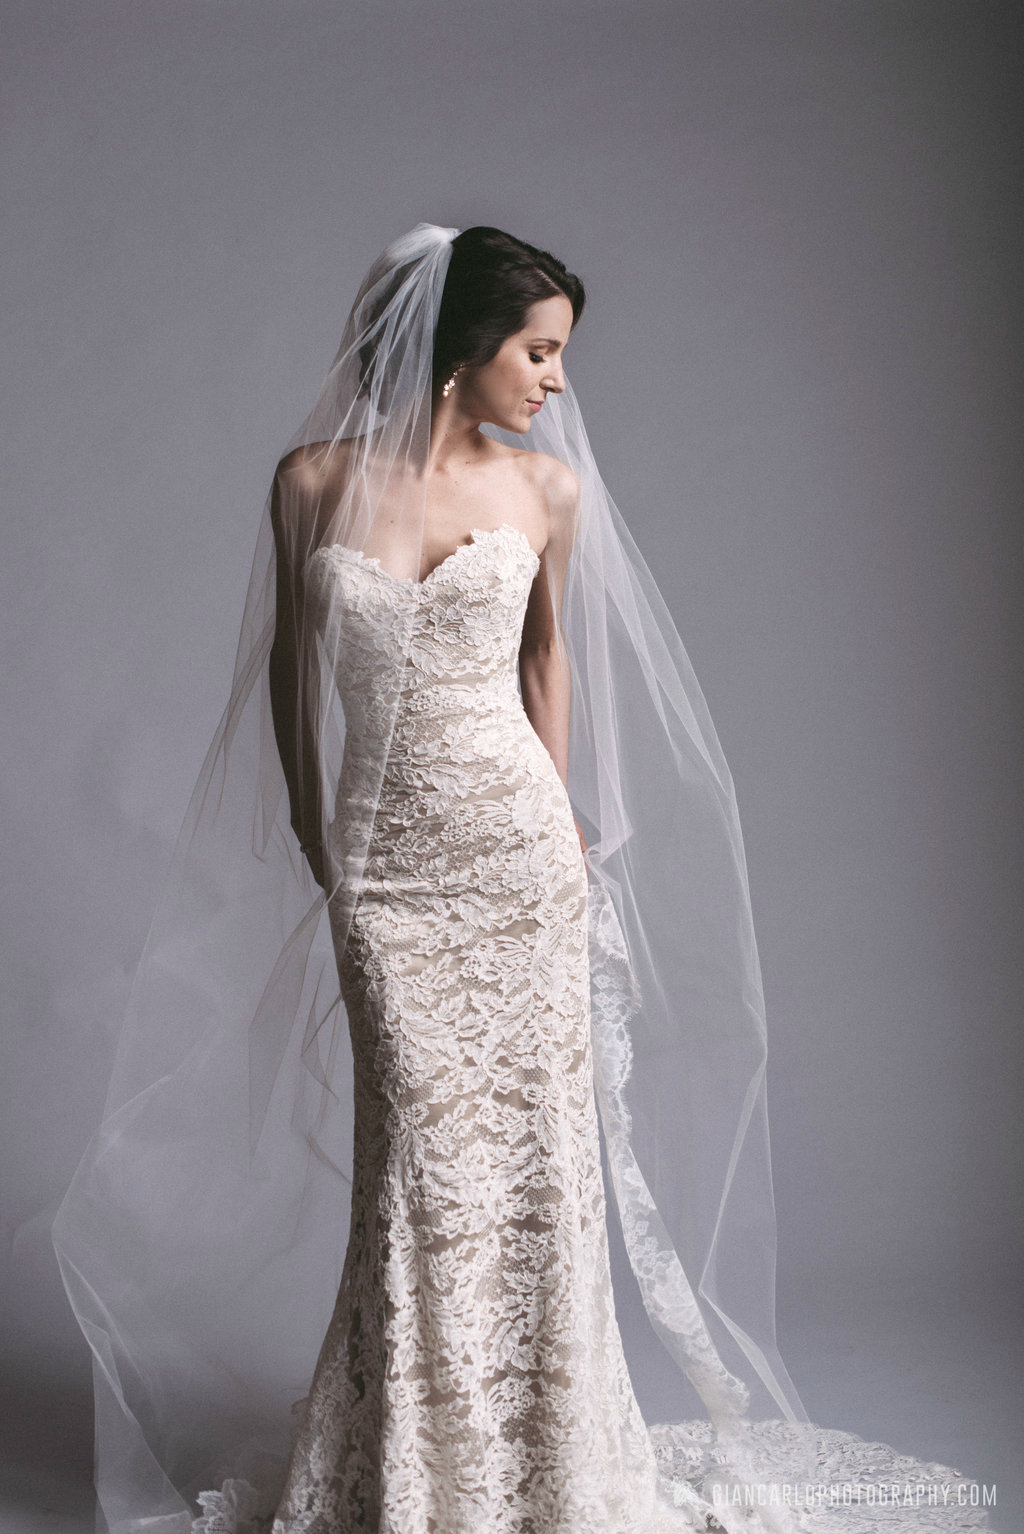 Solutions Bridal, Wedding Gown, Stephanie Ziajka, Diary of a Debutante, Gian Carlo Photography